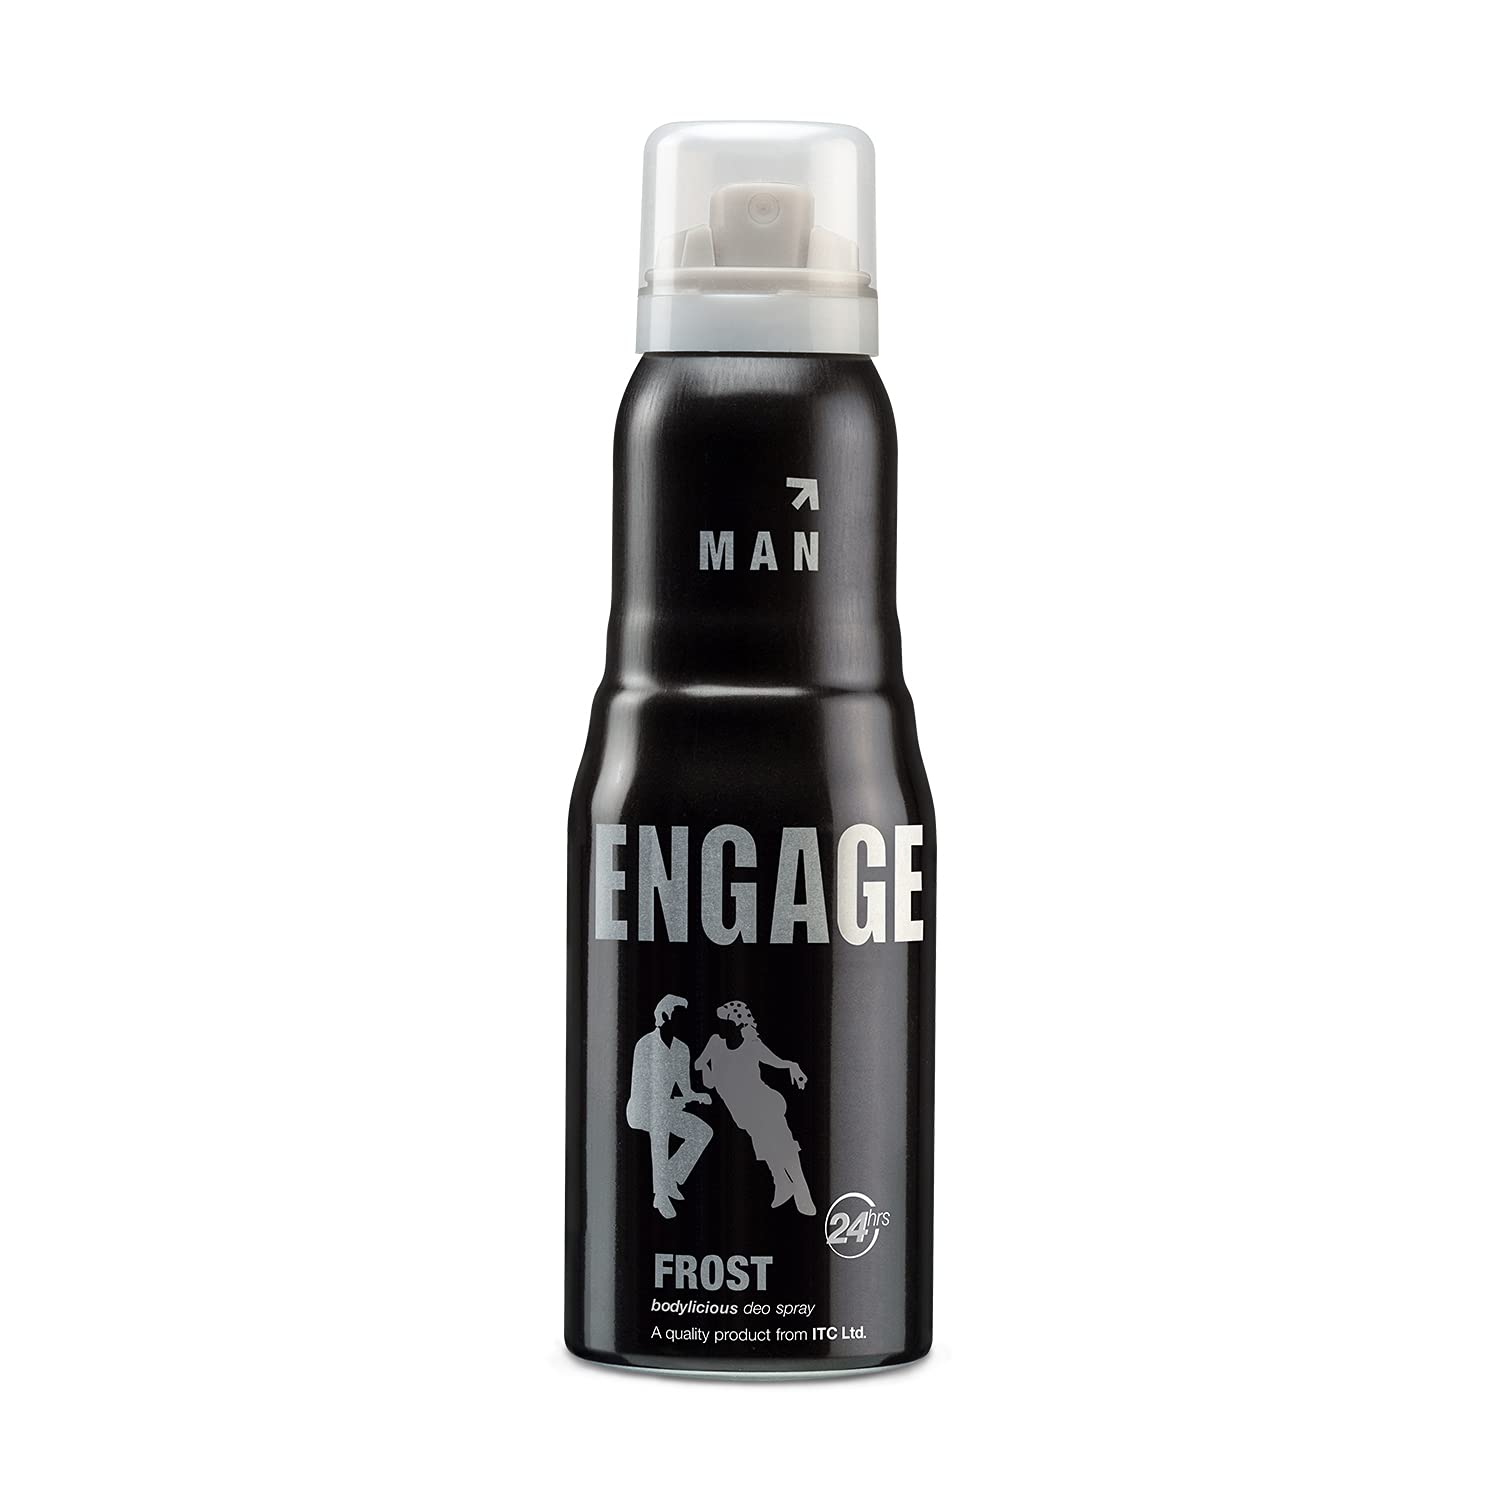 Man Engage Frost Deo Spray